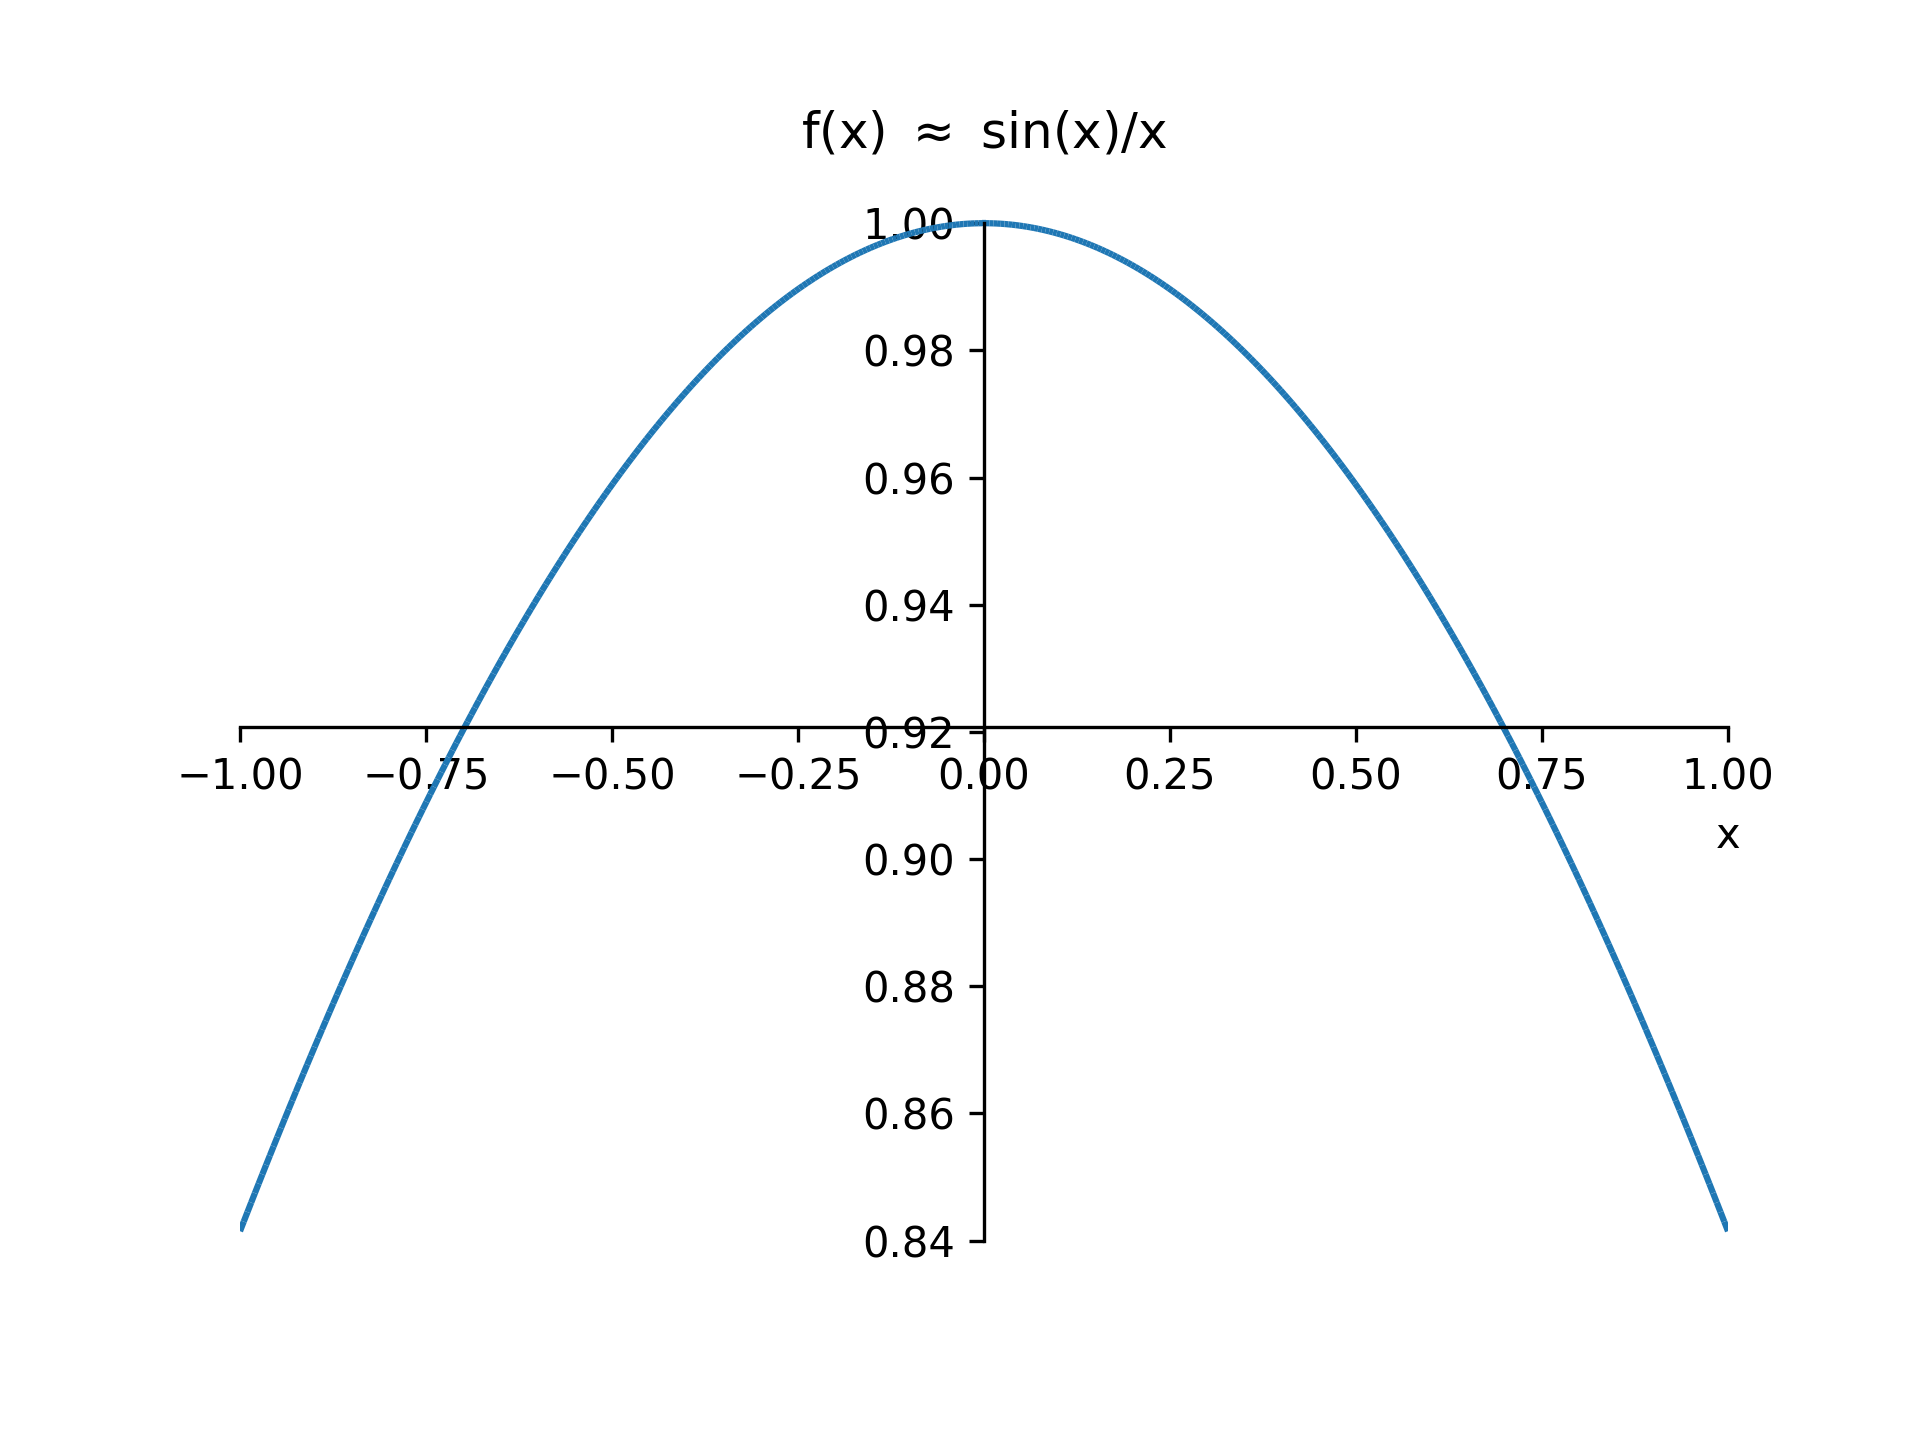 images/sin(x)_x_approximation.png